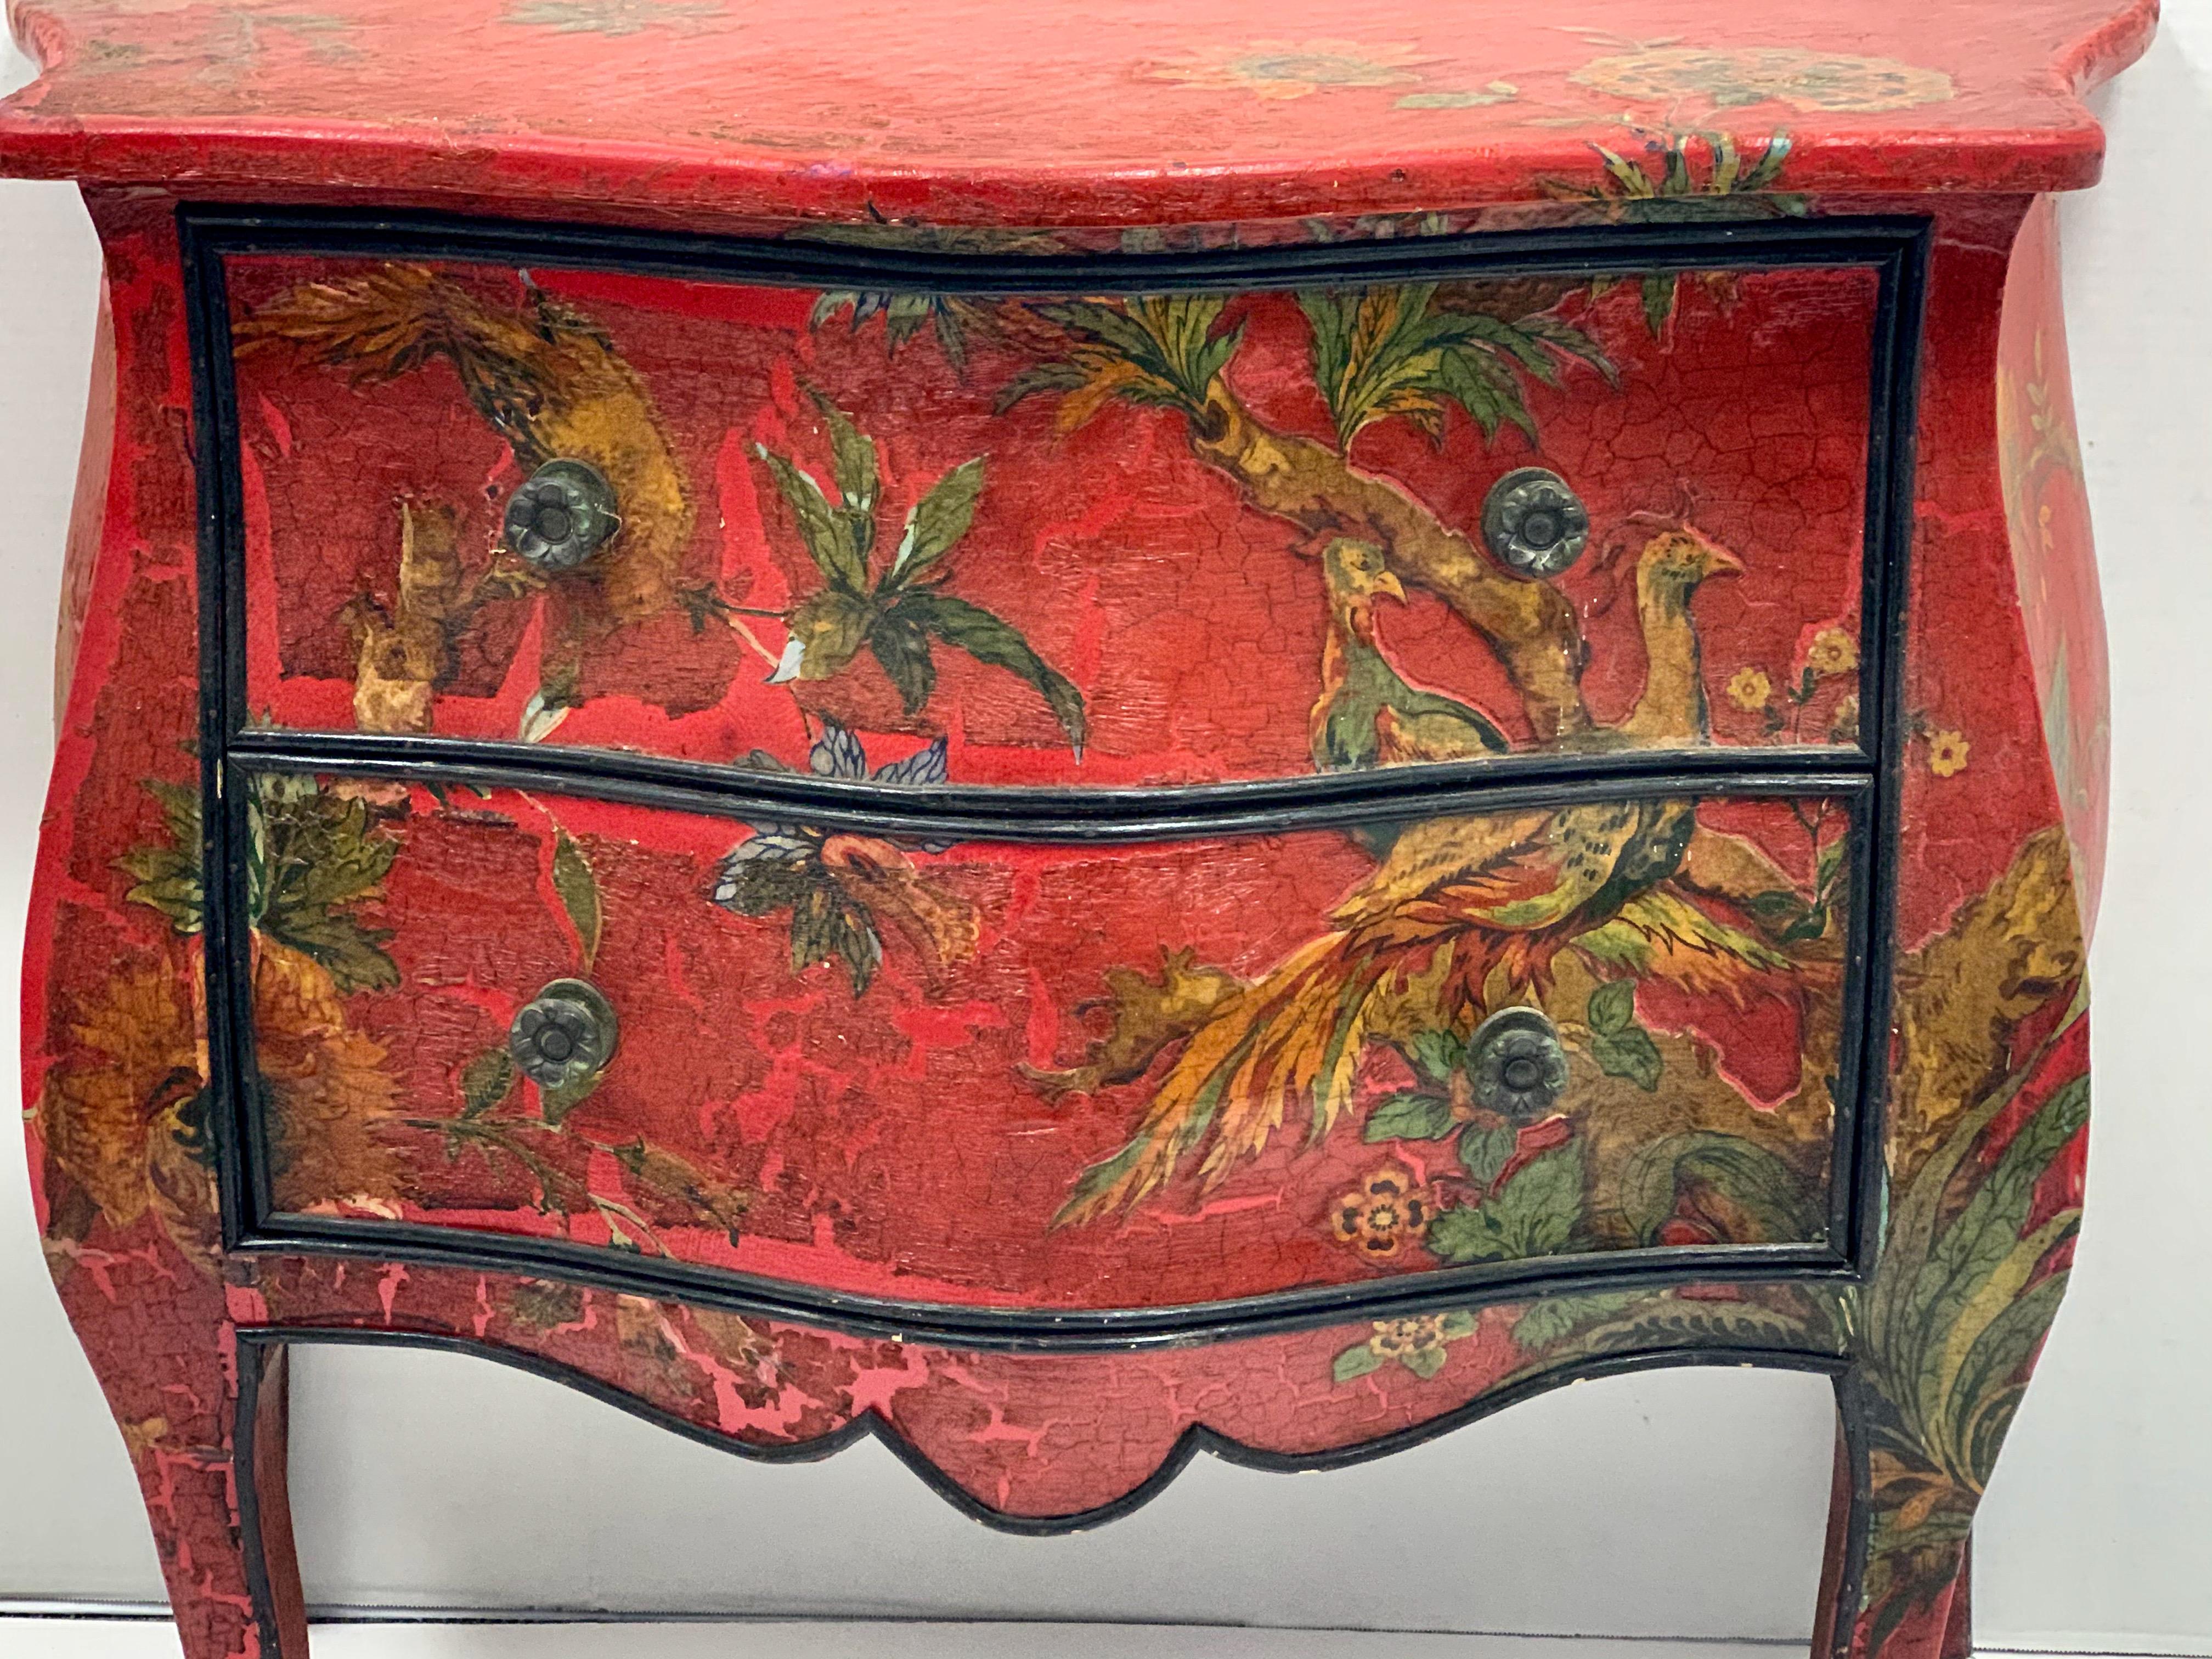 Poplar Antique French Red Chinoiserie Bombe Chest of Drawers with Decoupage